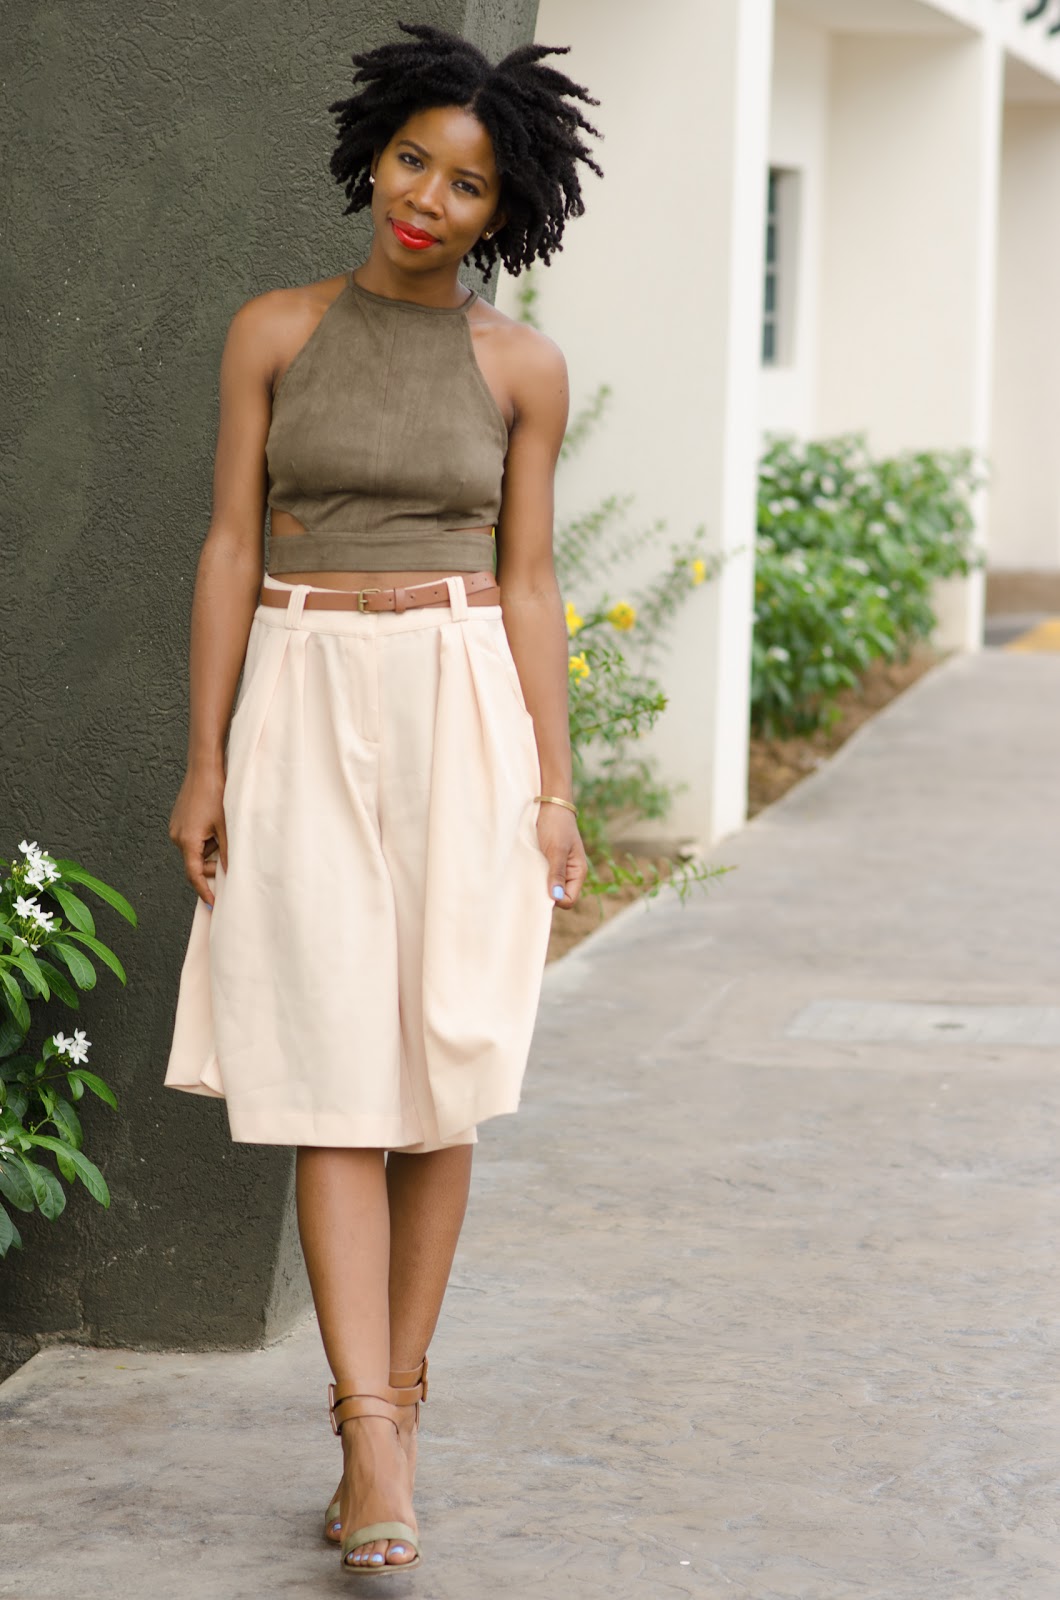 Beige culottes outfit — Covet & Acquire